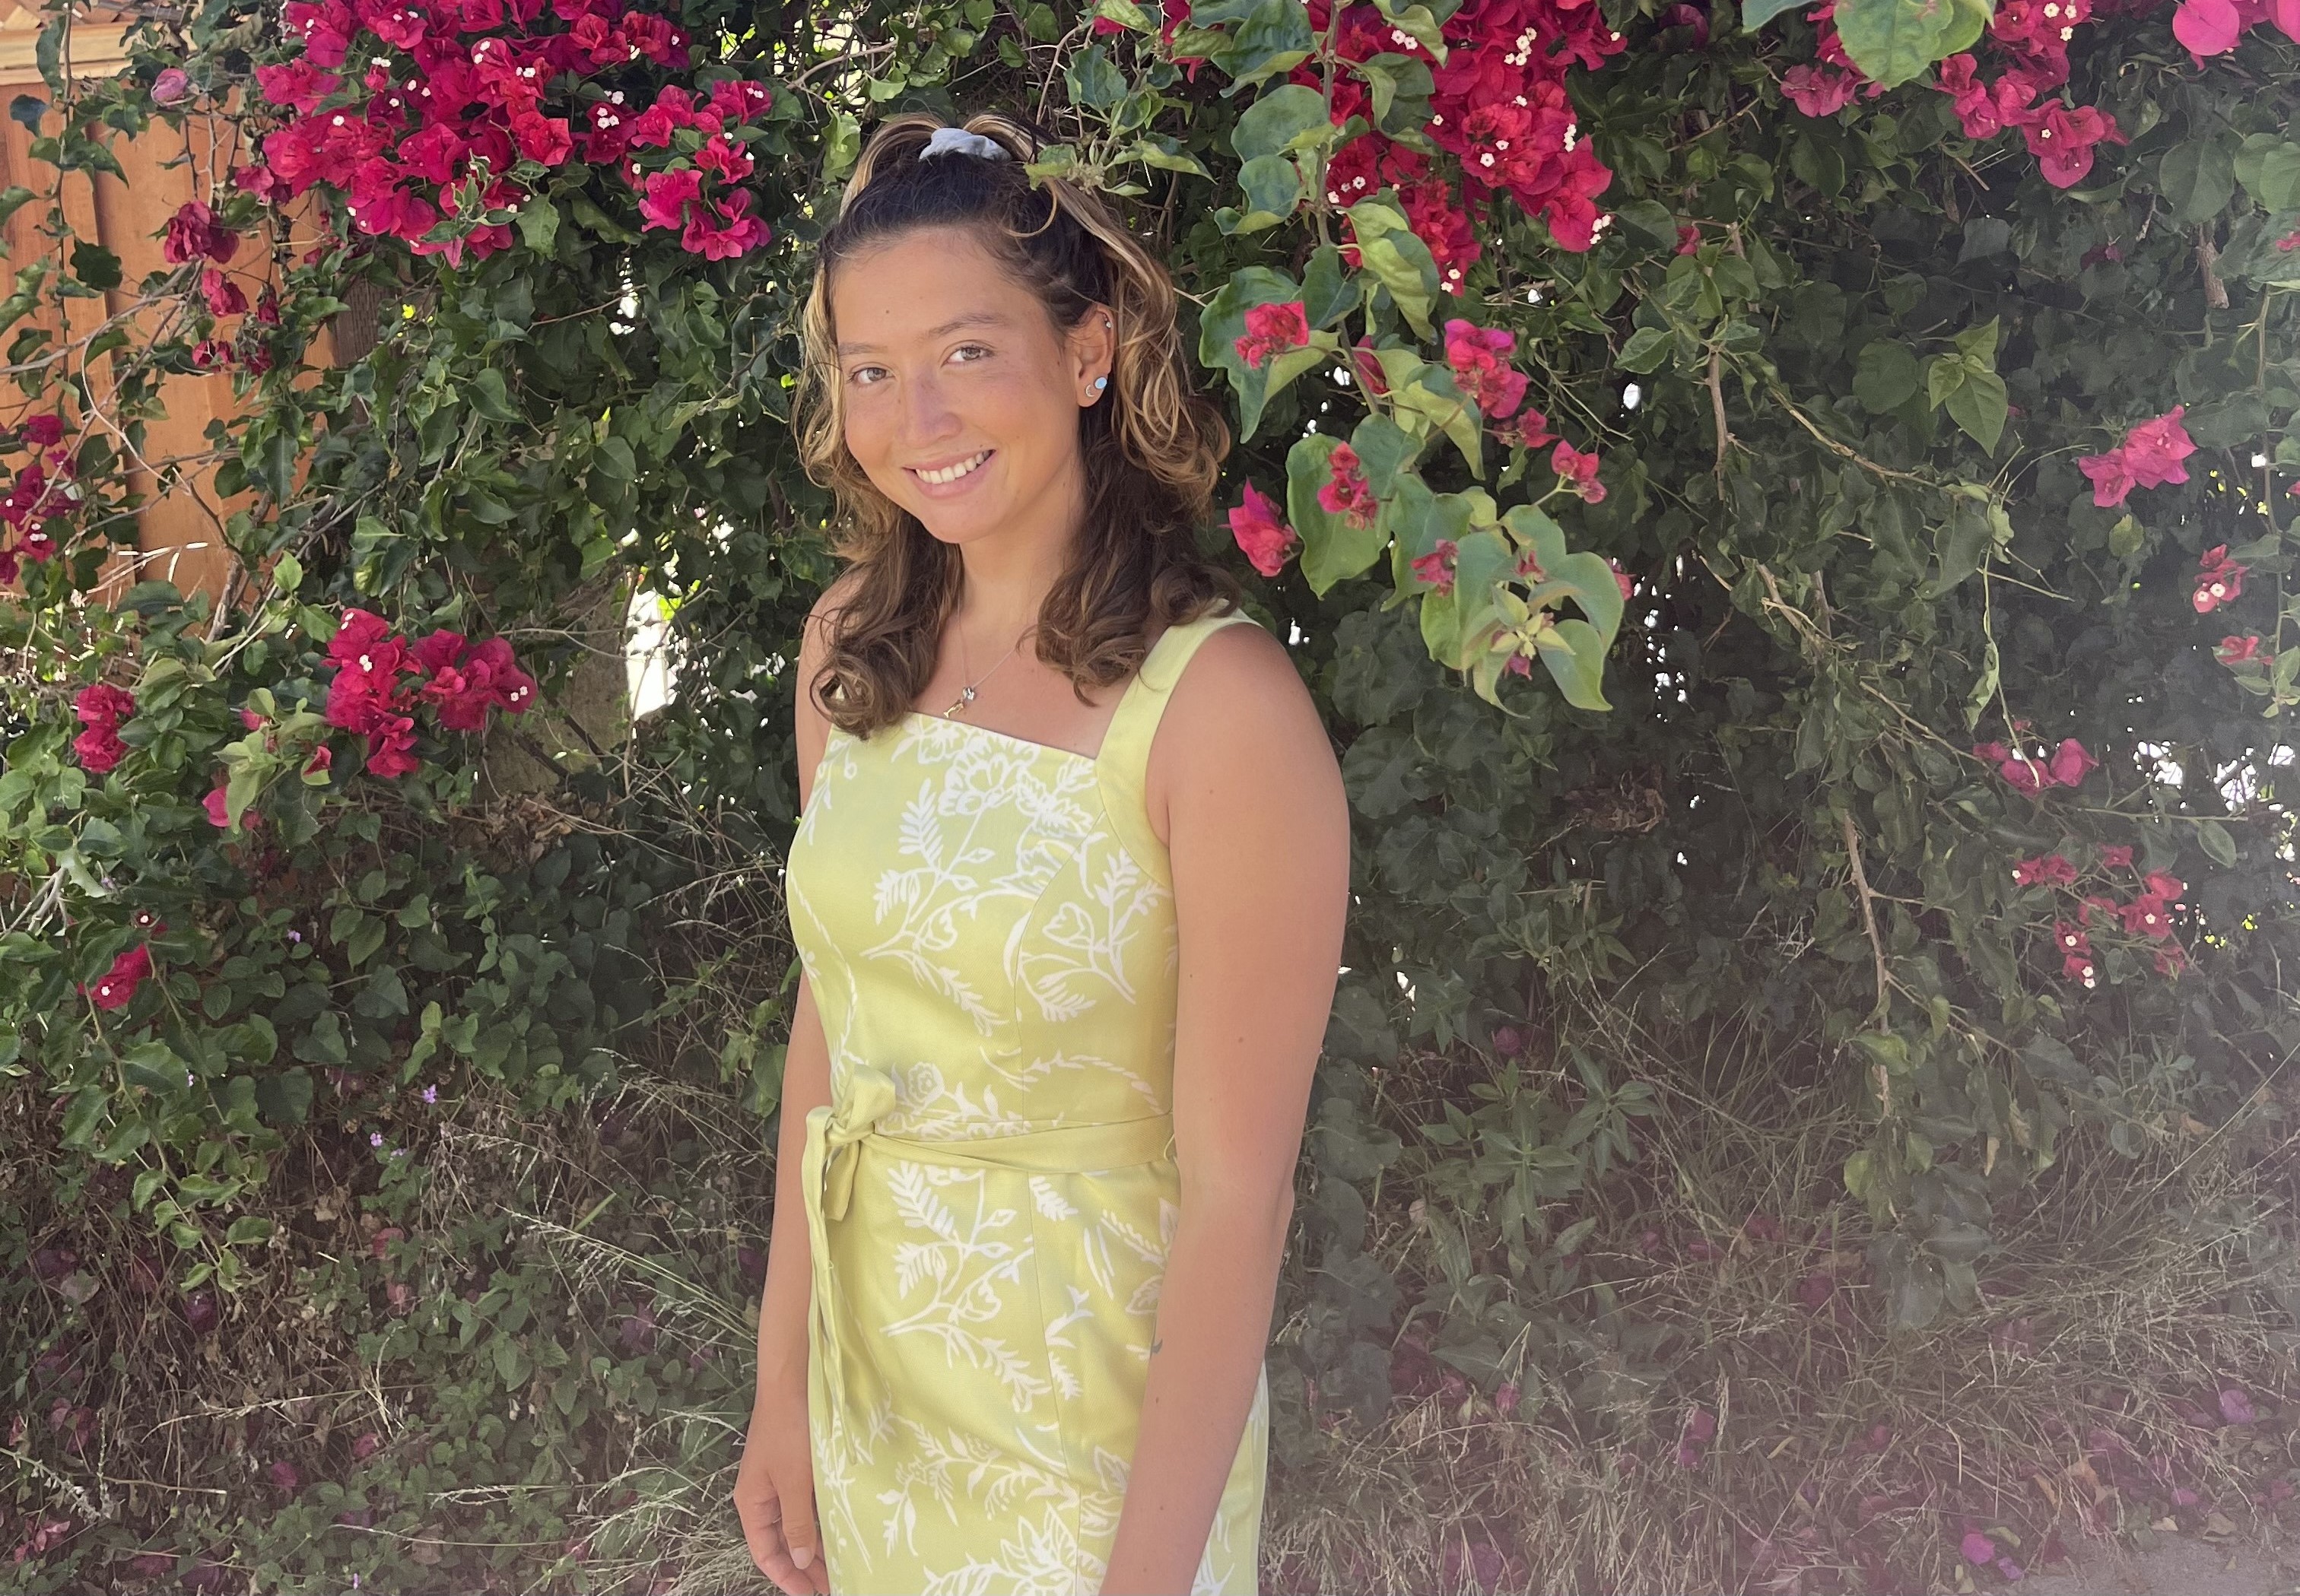 Alyssa smiling and standing in front of a tree with pink and white flowers. Alyssa is wearing a yellow dress with white plant stencils